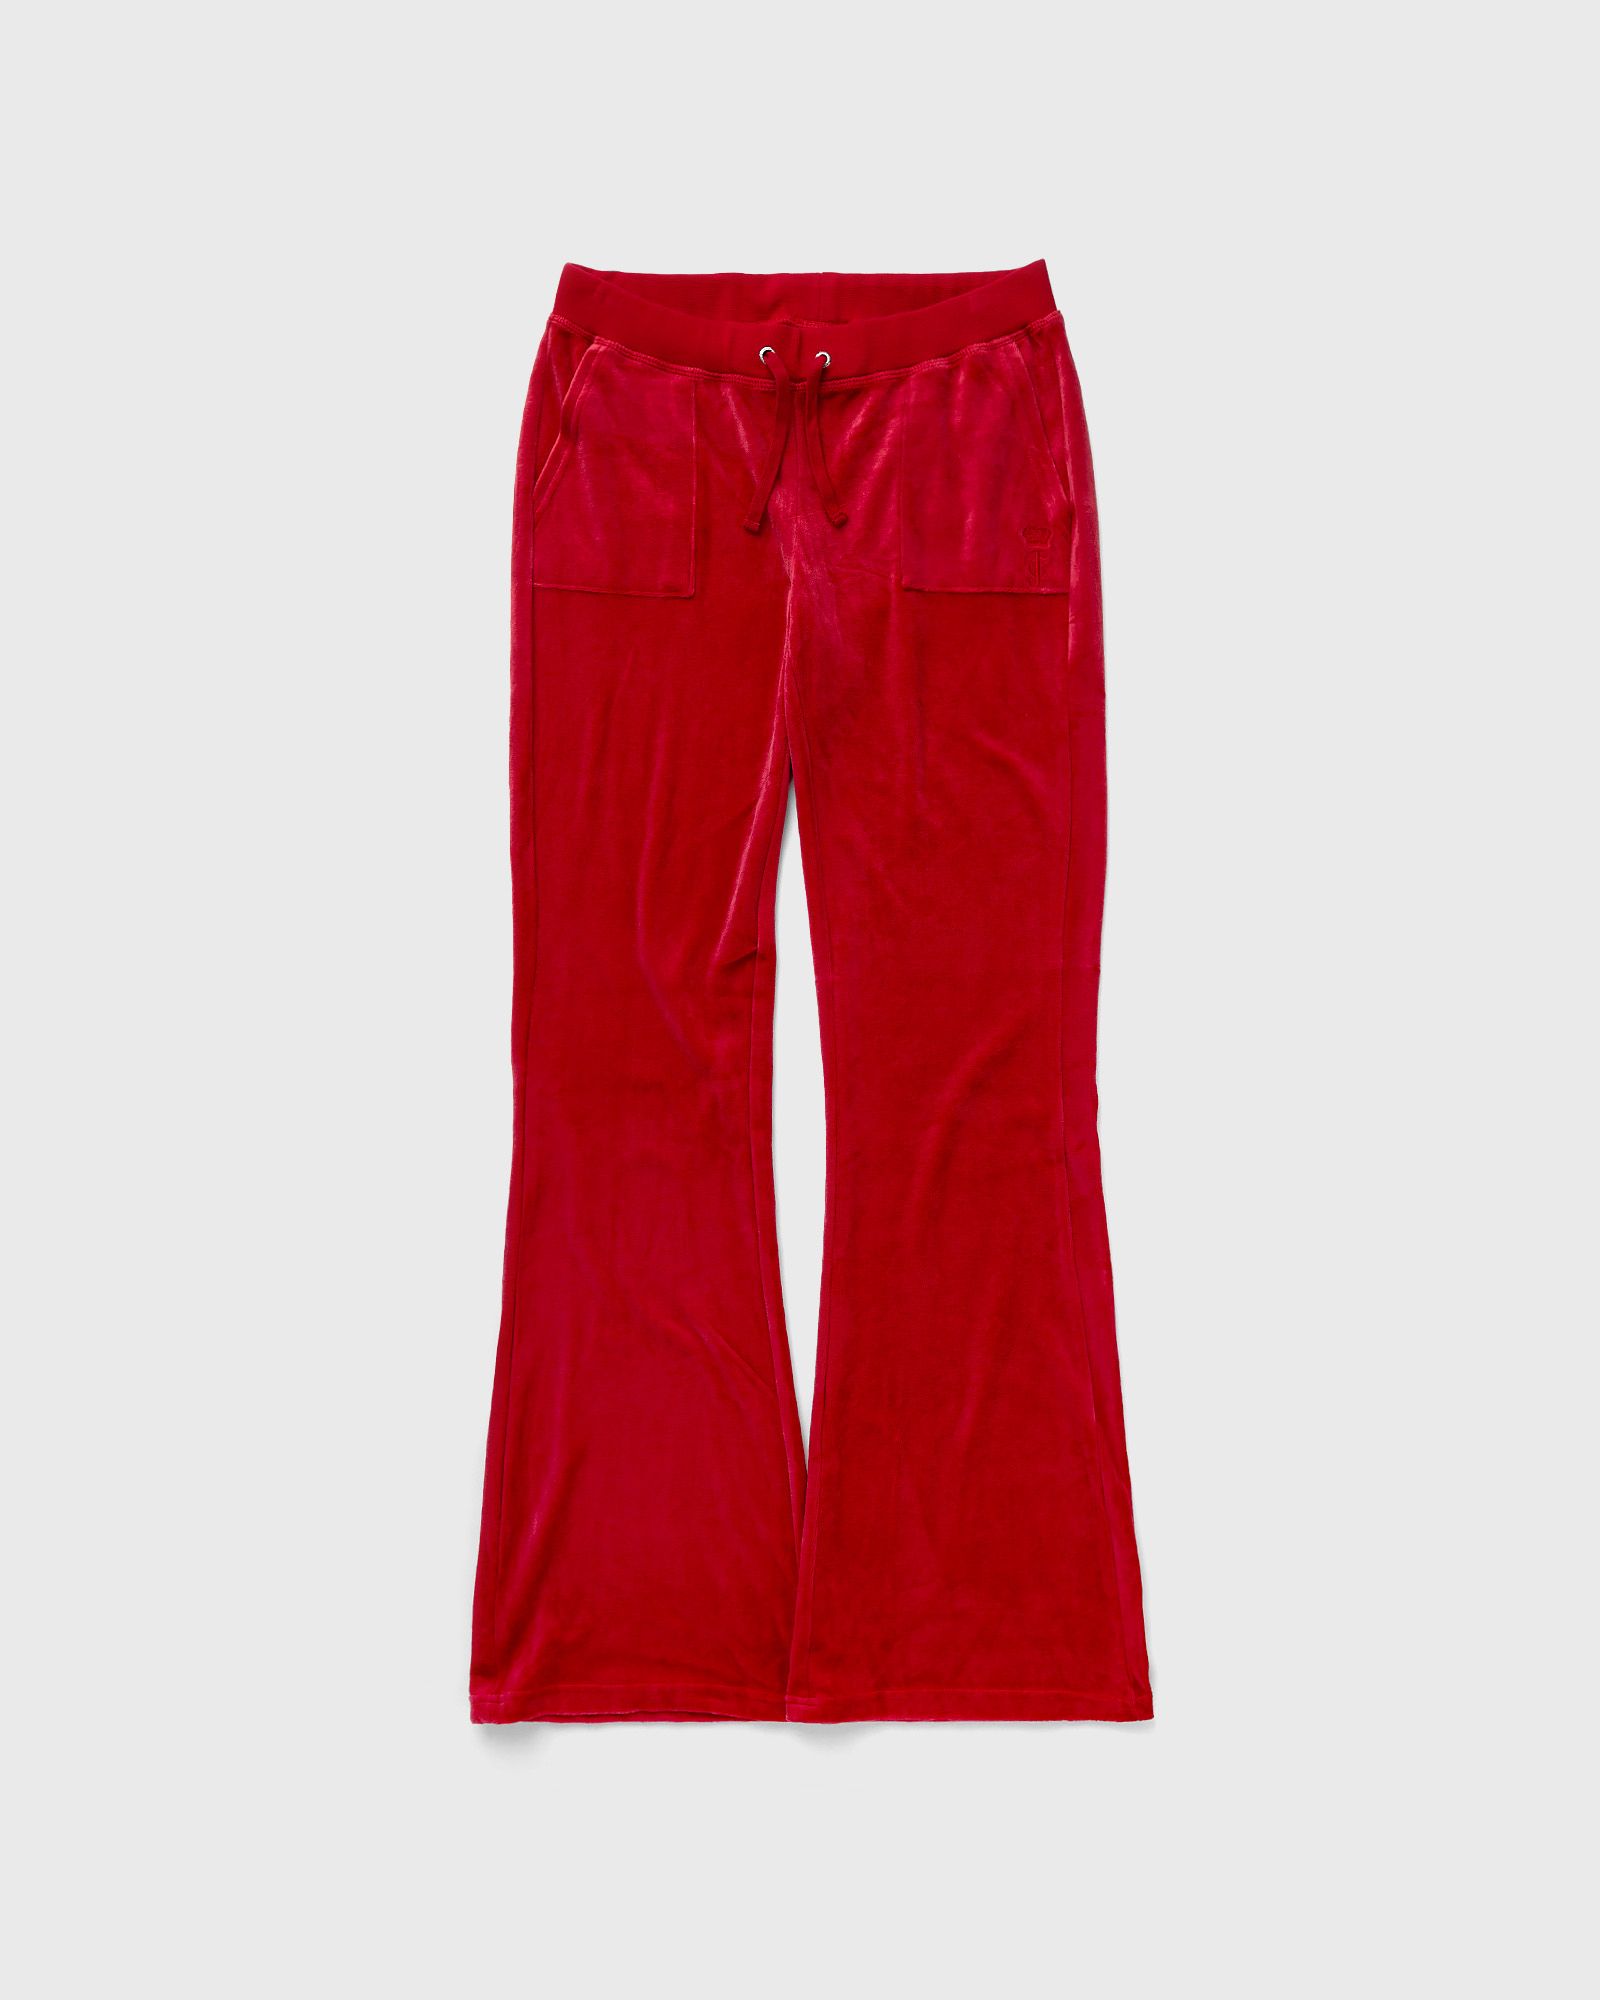 Juicy Couture - wmns caisa pant women sweatpants red in größe:xs